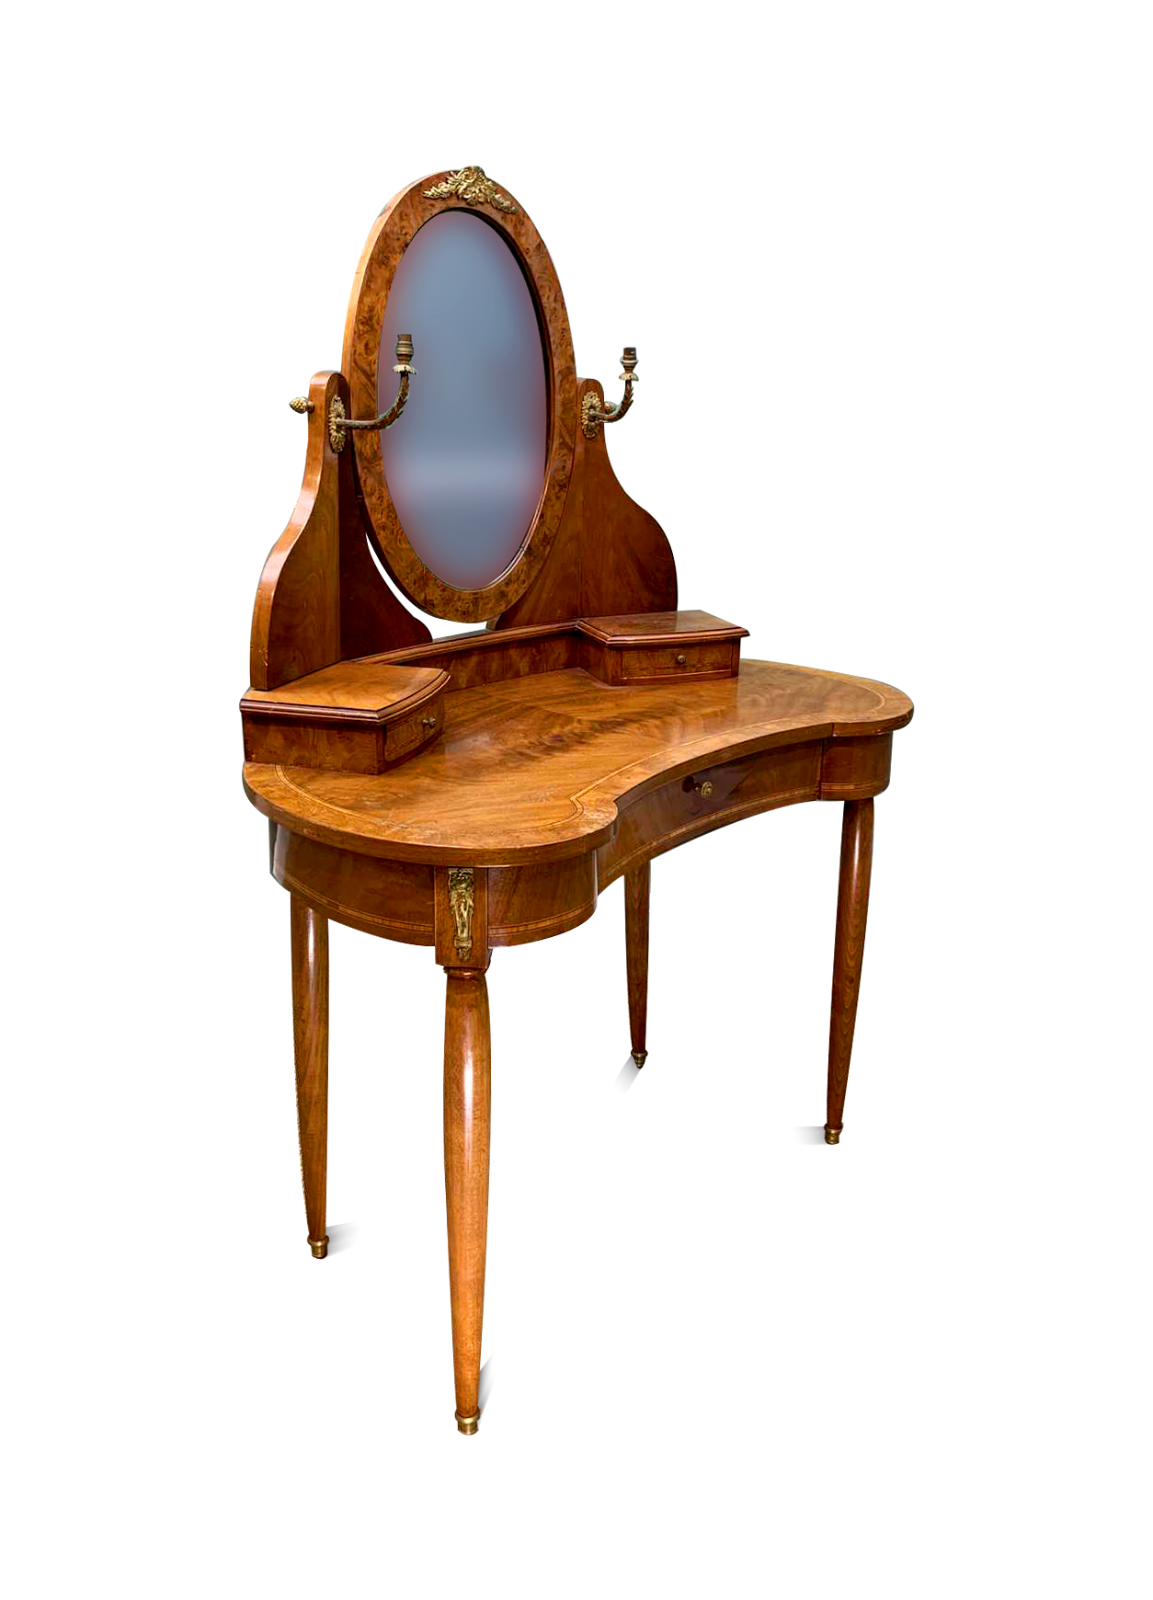 Antique Dressing Table 20th century Empire-Style Walnut Dressing Table